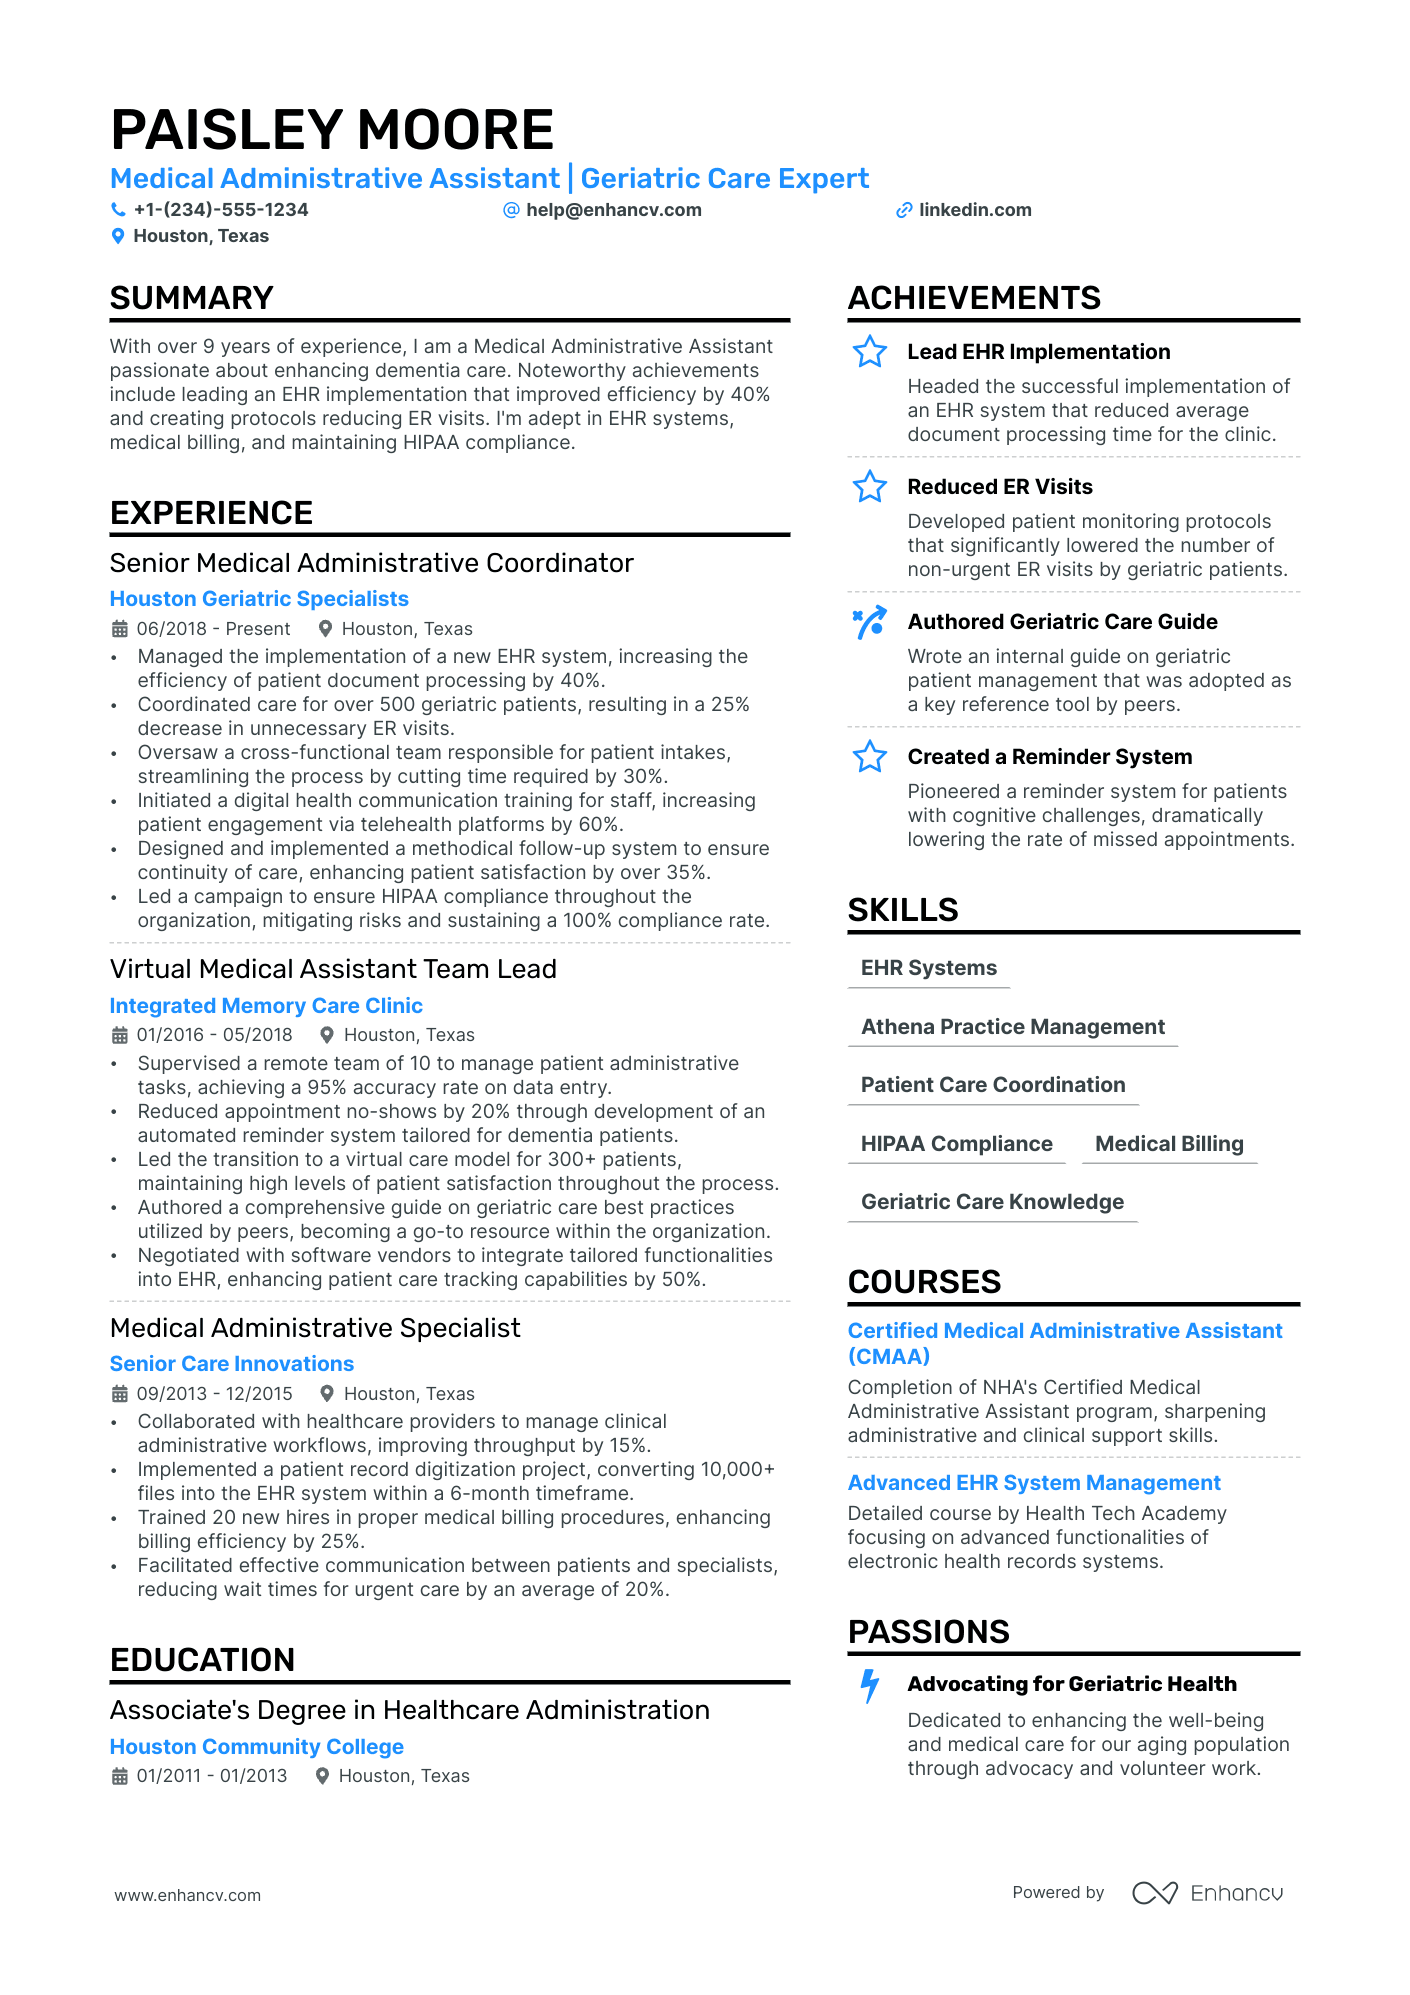 Medical Administrative Assistant resume example